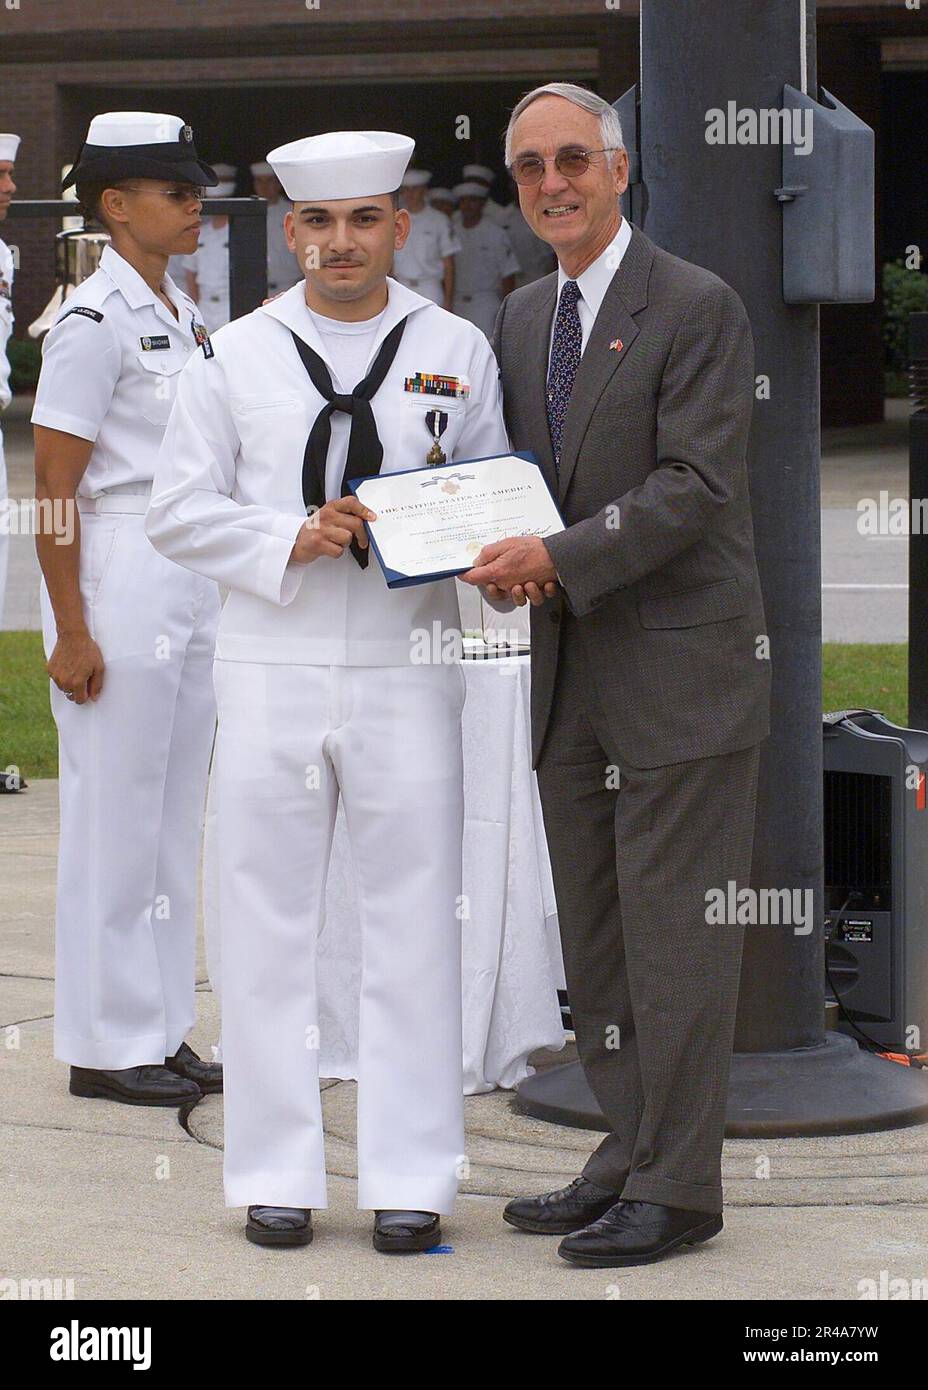 US Navy Secretary of the Navy, Gordon R. England presents the Navy Cross to Hospitalman Apprentice Luis E. Fonseca, Jr., for heroism during the battle of An Nasiriyah, Iraq, in March 2003 Stock Photo